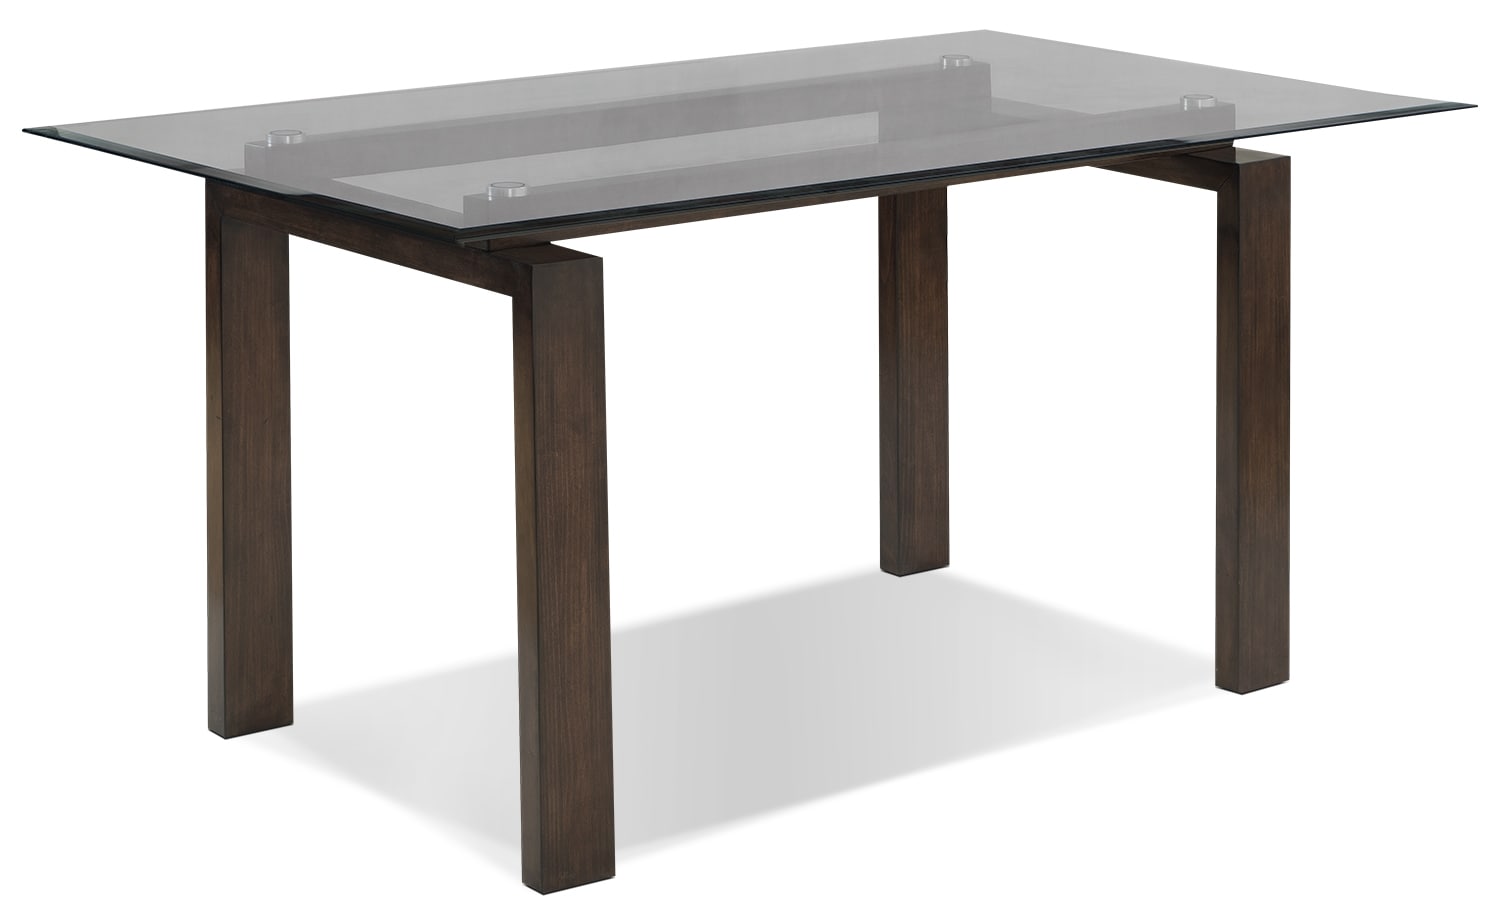 Tyler Dining Table | The Brick